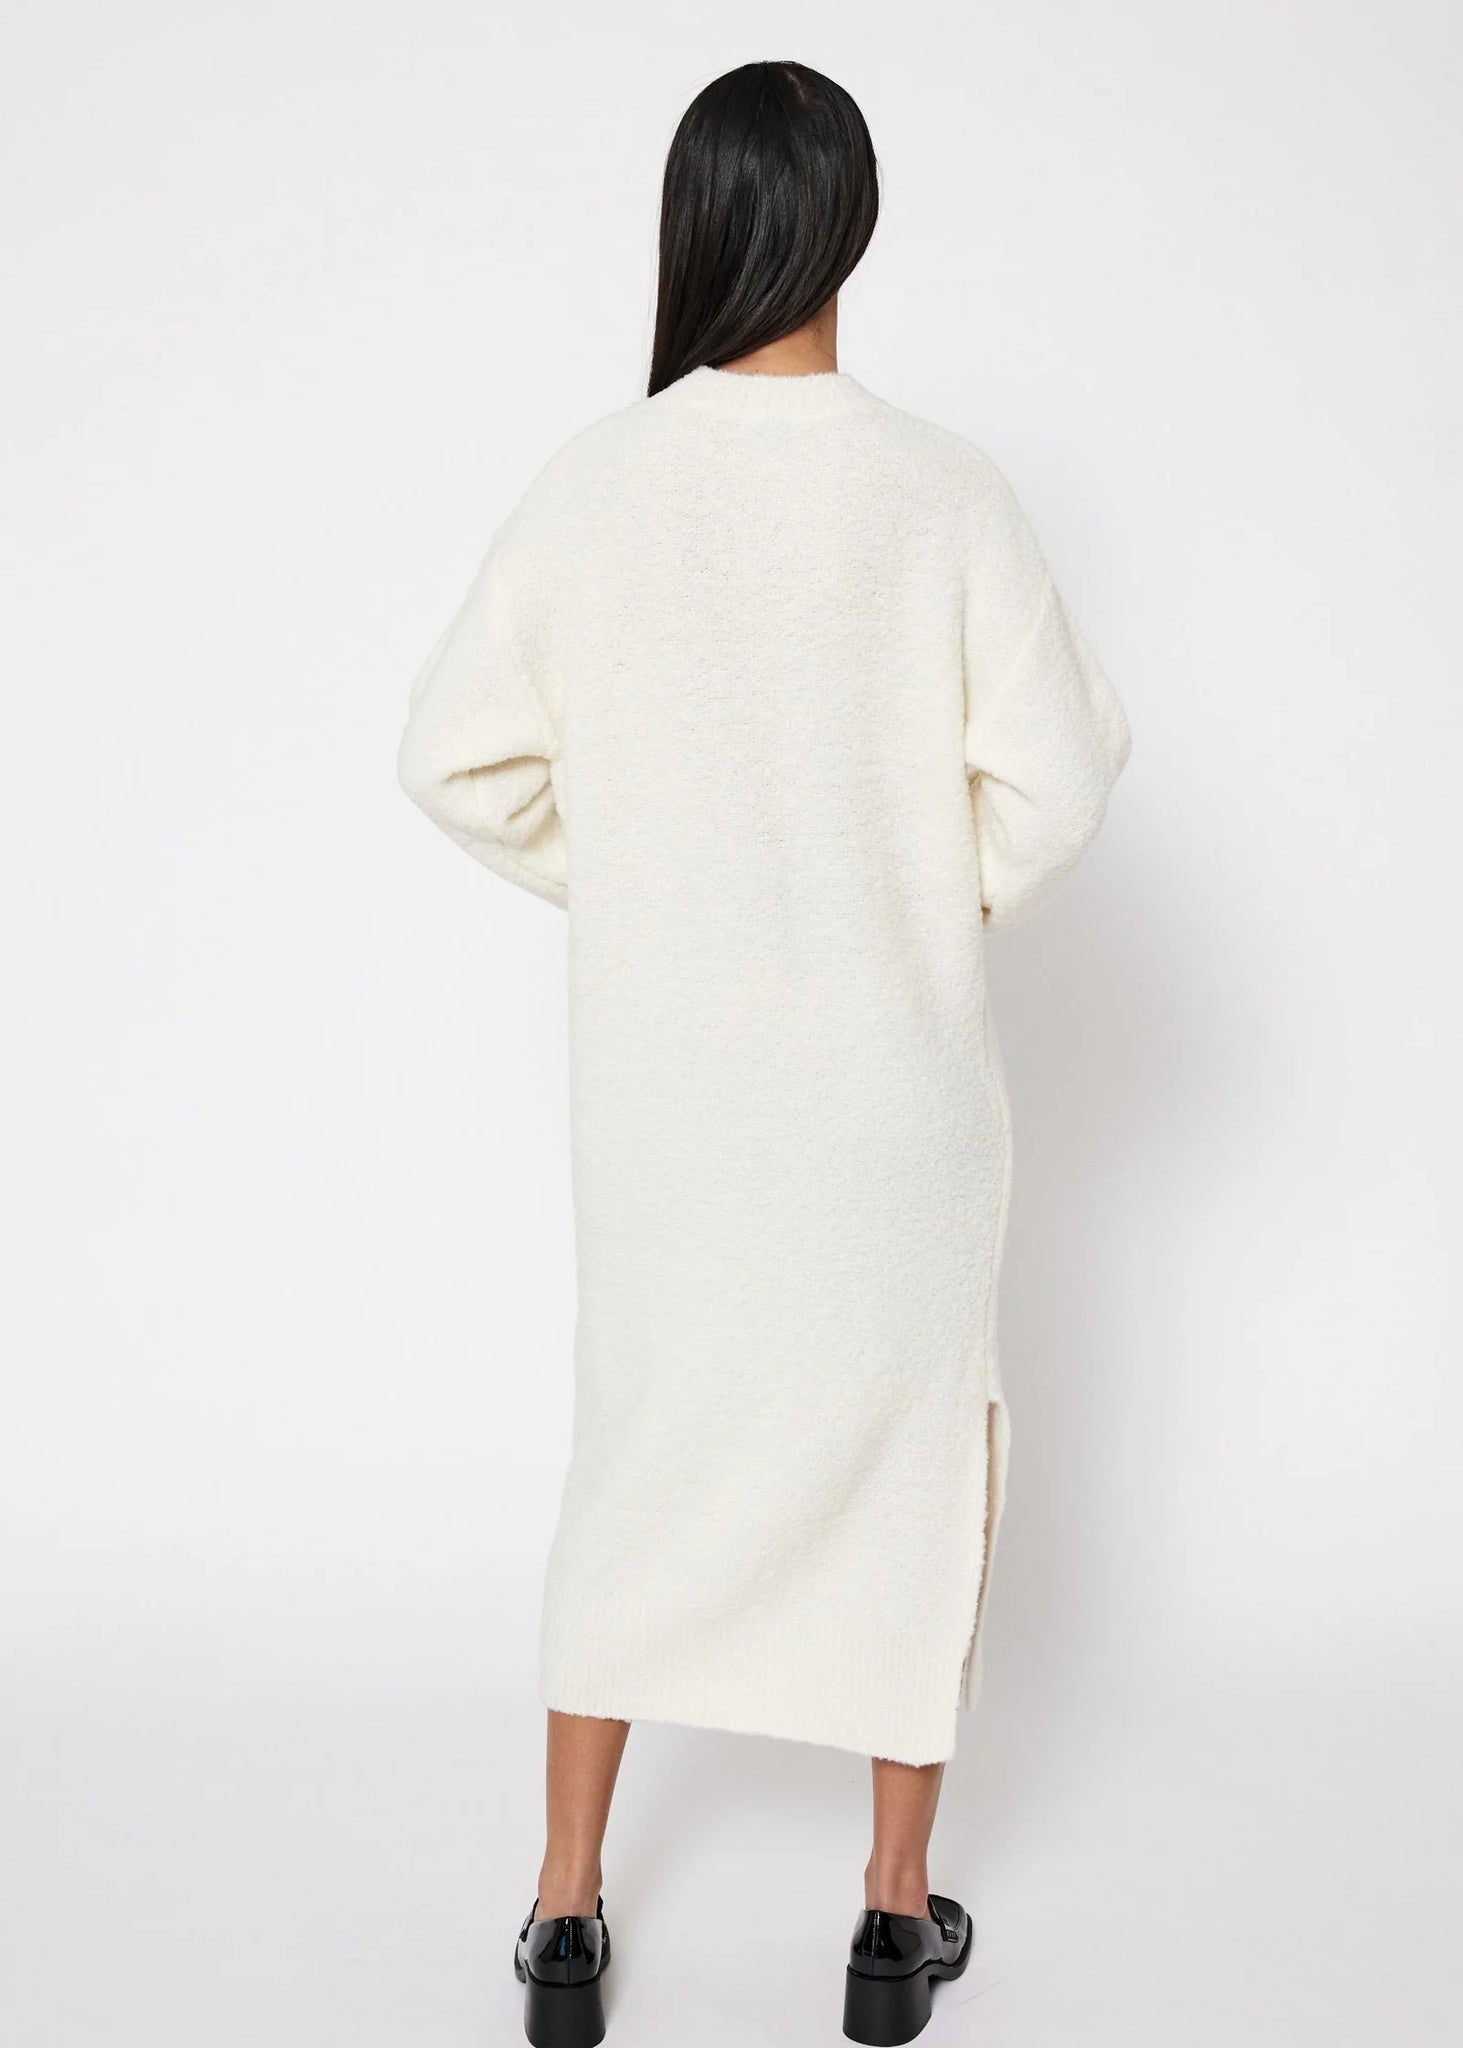 Vica knit dress in white